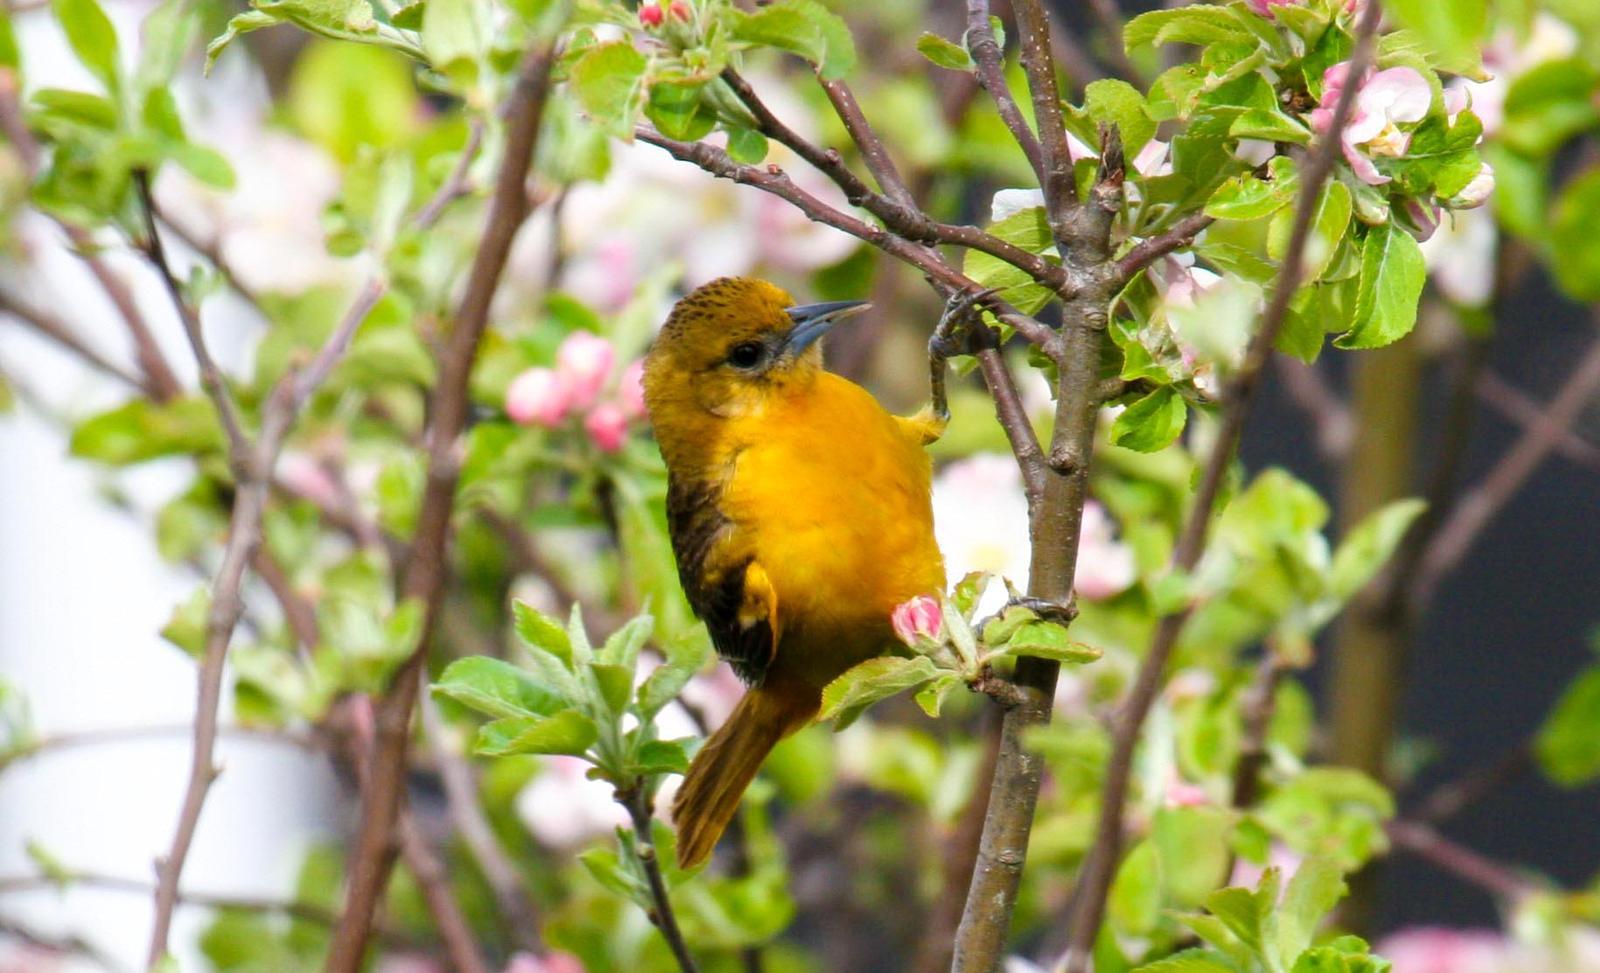 Baltimore Oriole Photo by Roseanne CALECA